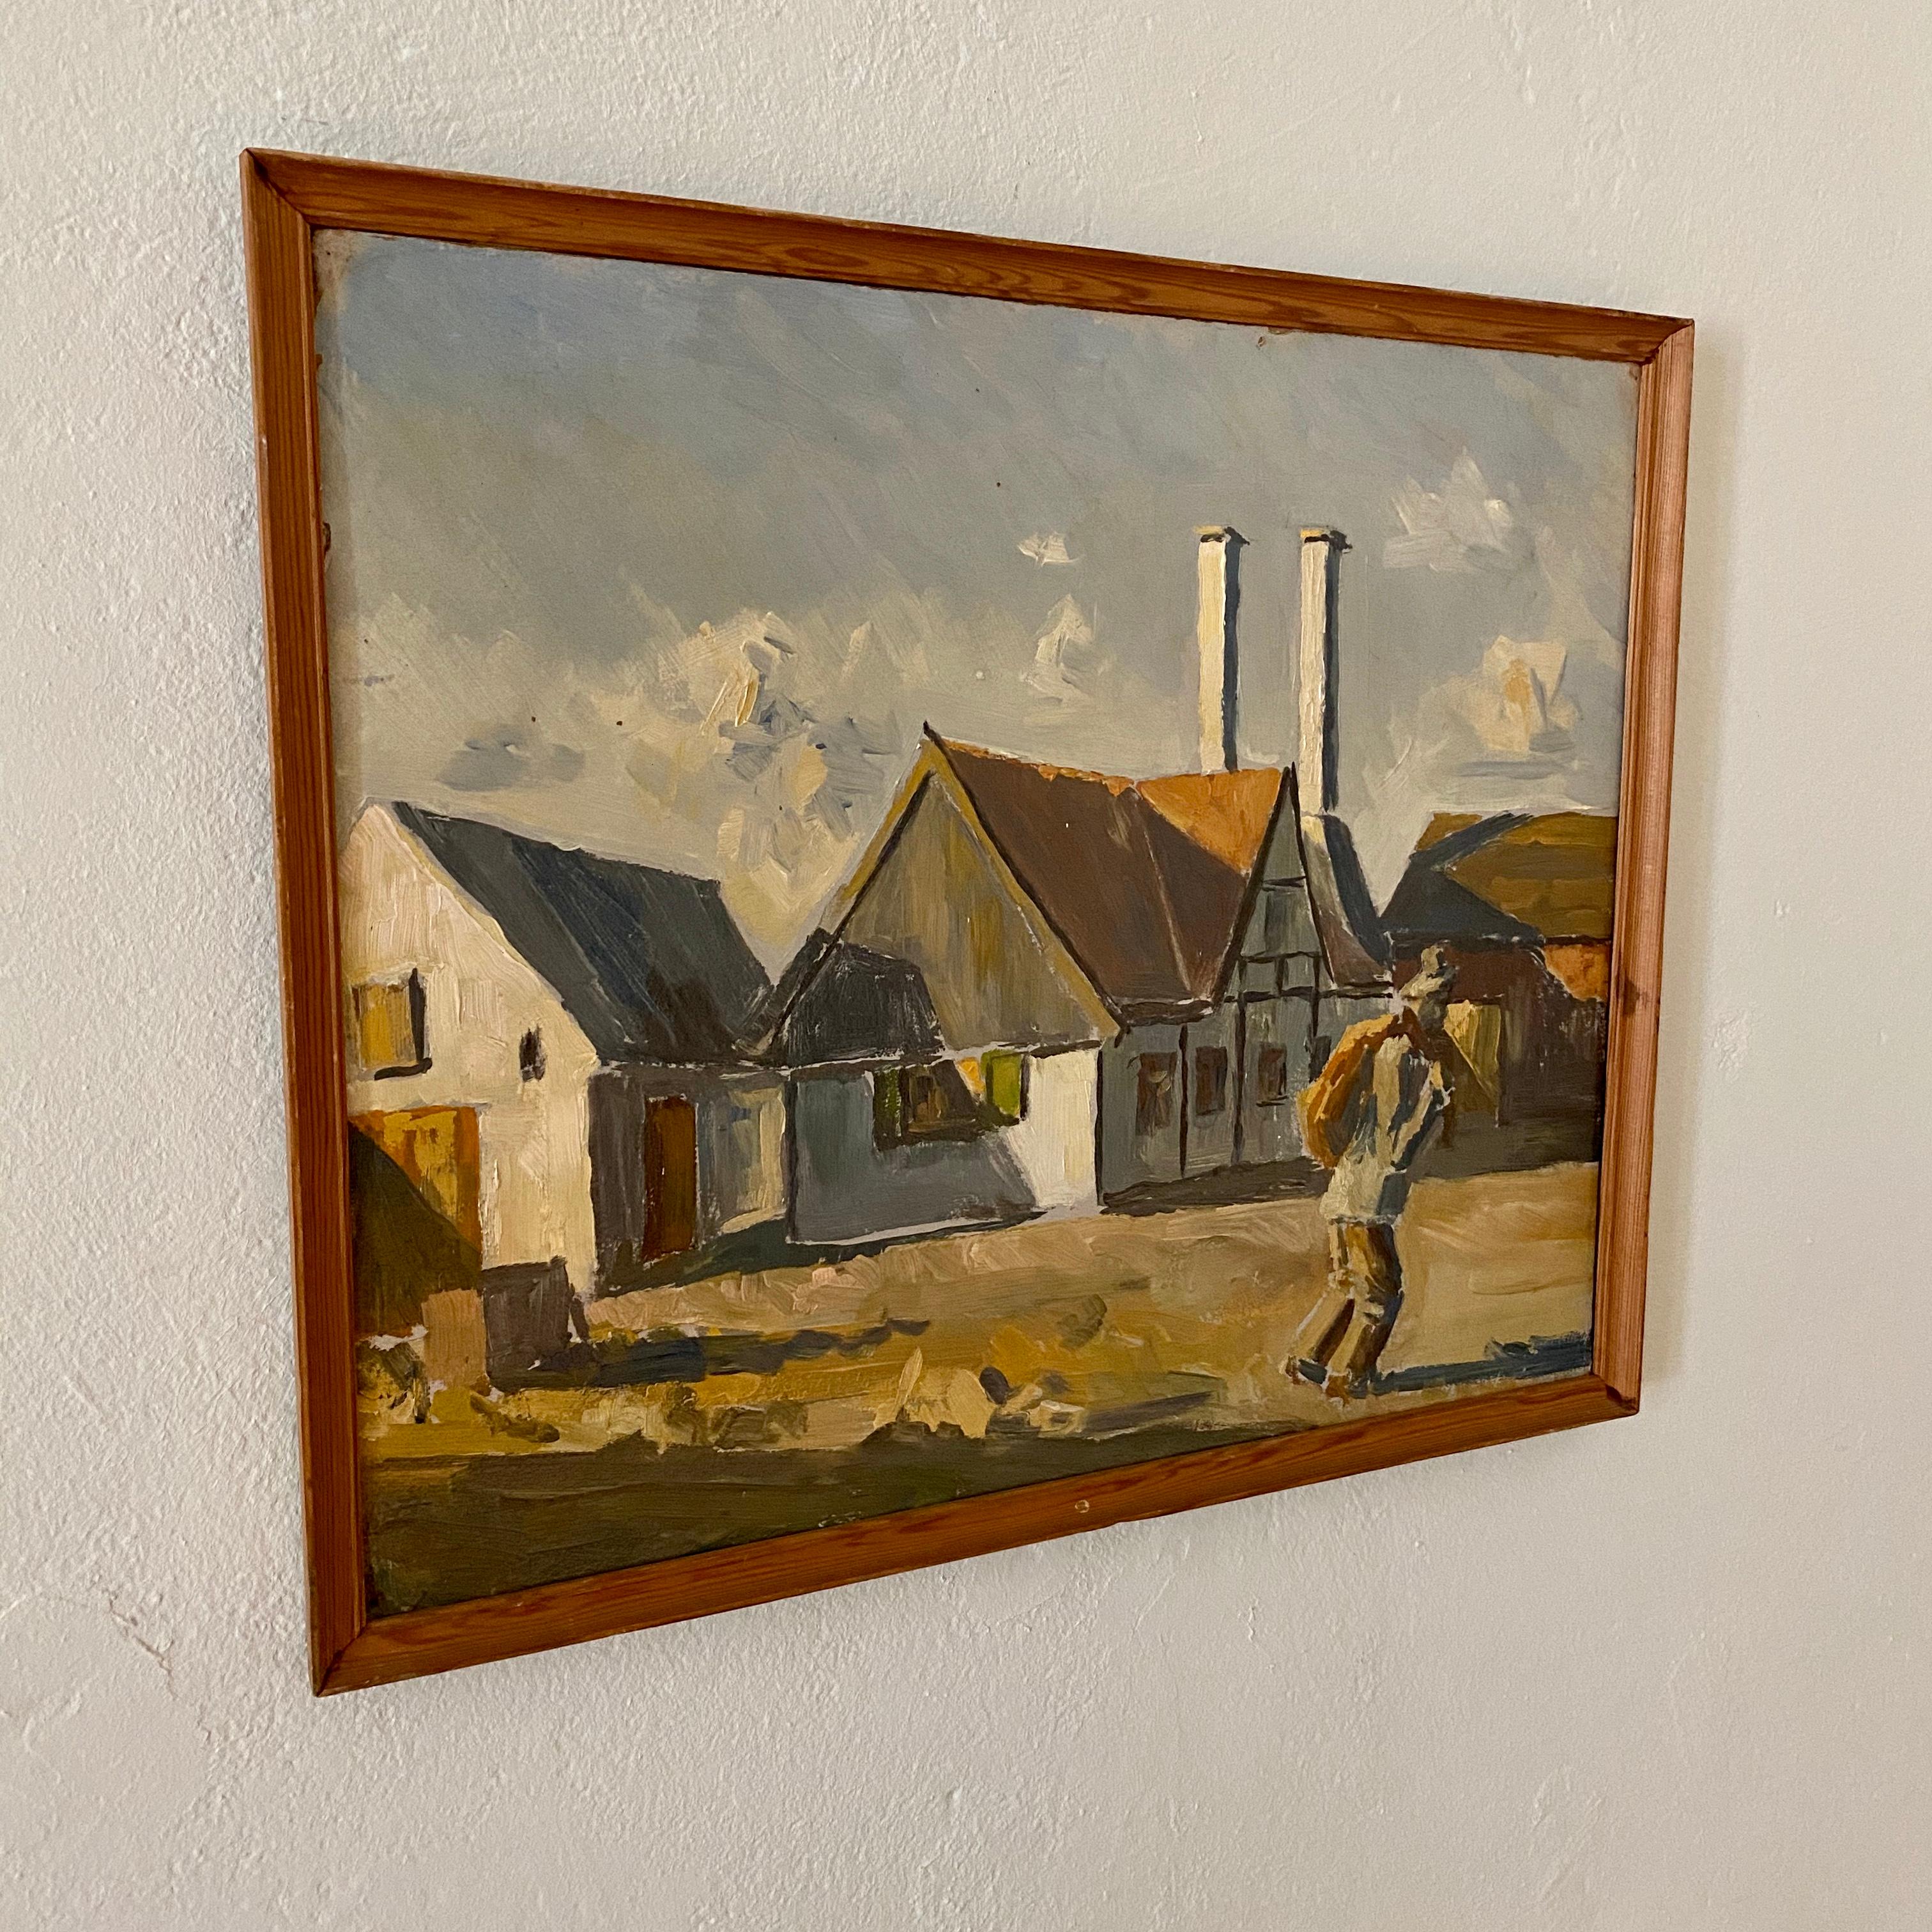 This midcentury French oil painting of a landscape has its original frame and was painted in the 1940s.
The painting has a very be depths and some very great colors.
A unique piece which is a great eyecatcher for your antique, modern, Space Age or